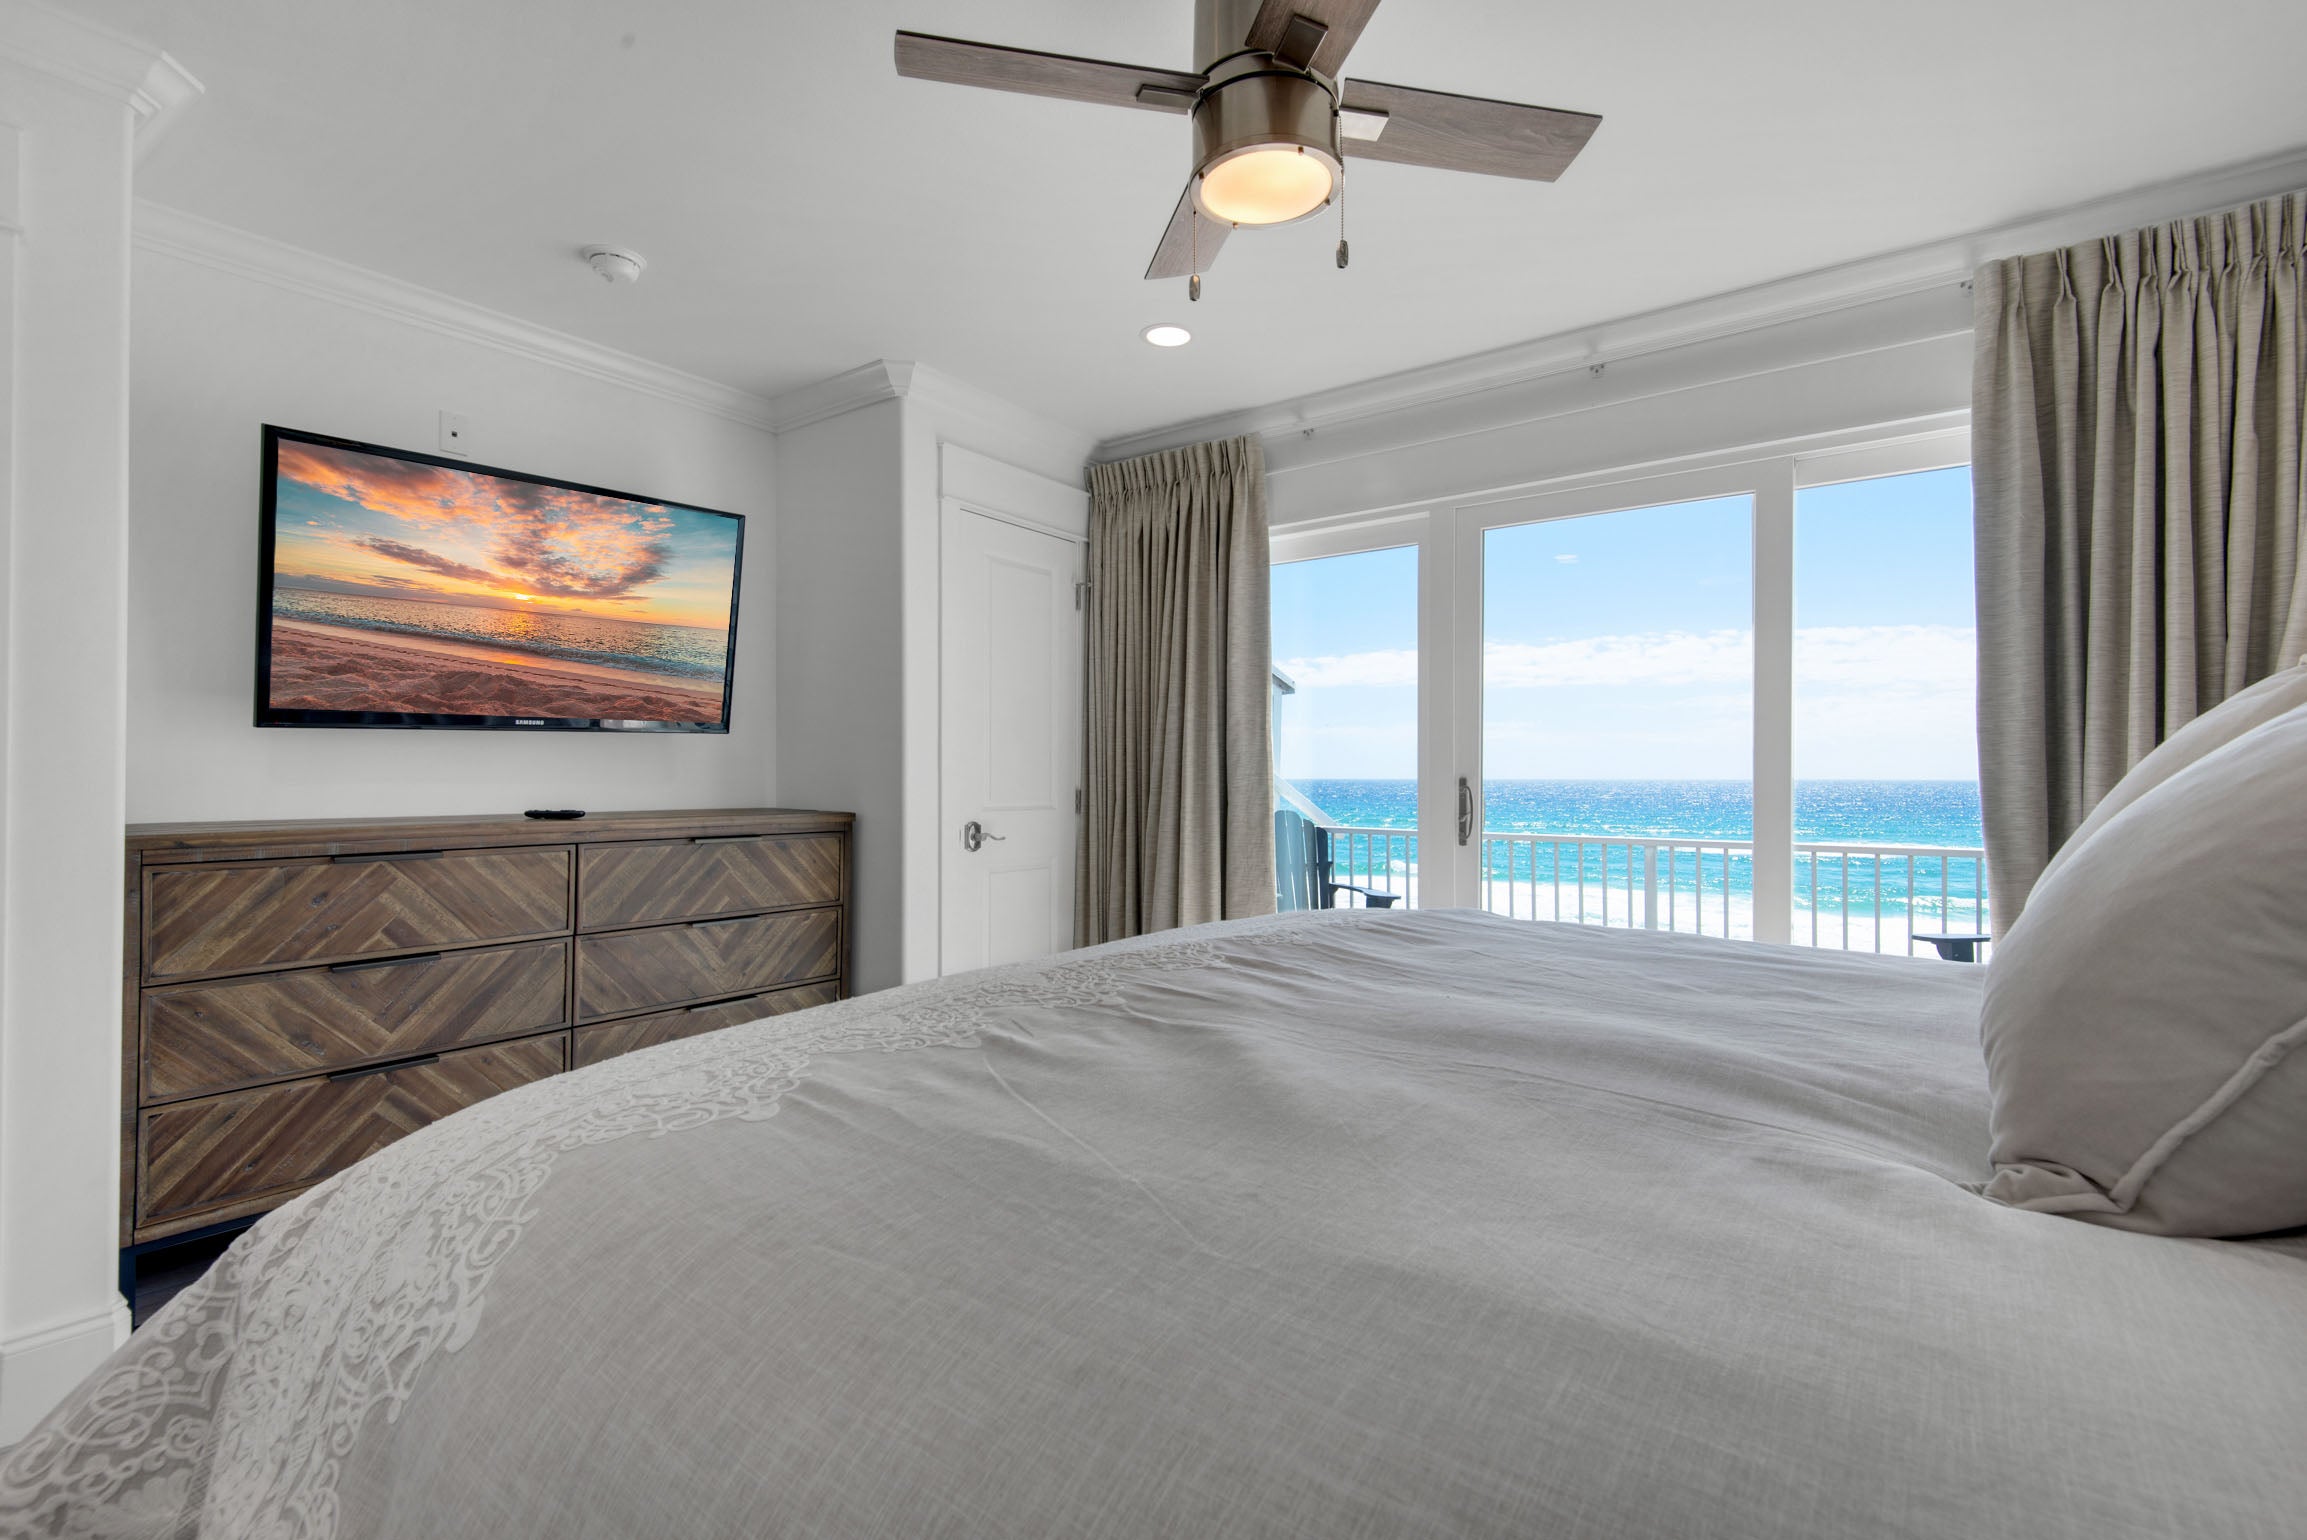 3rd floor Master bedroom with gorgeous views